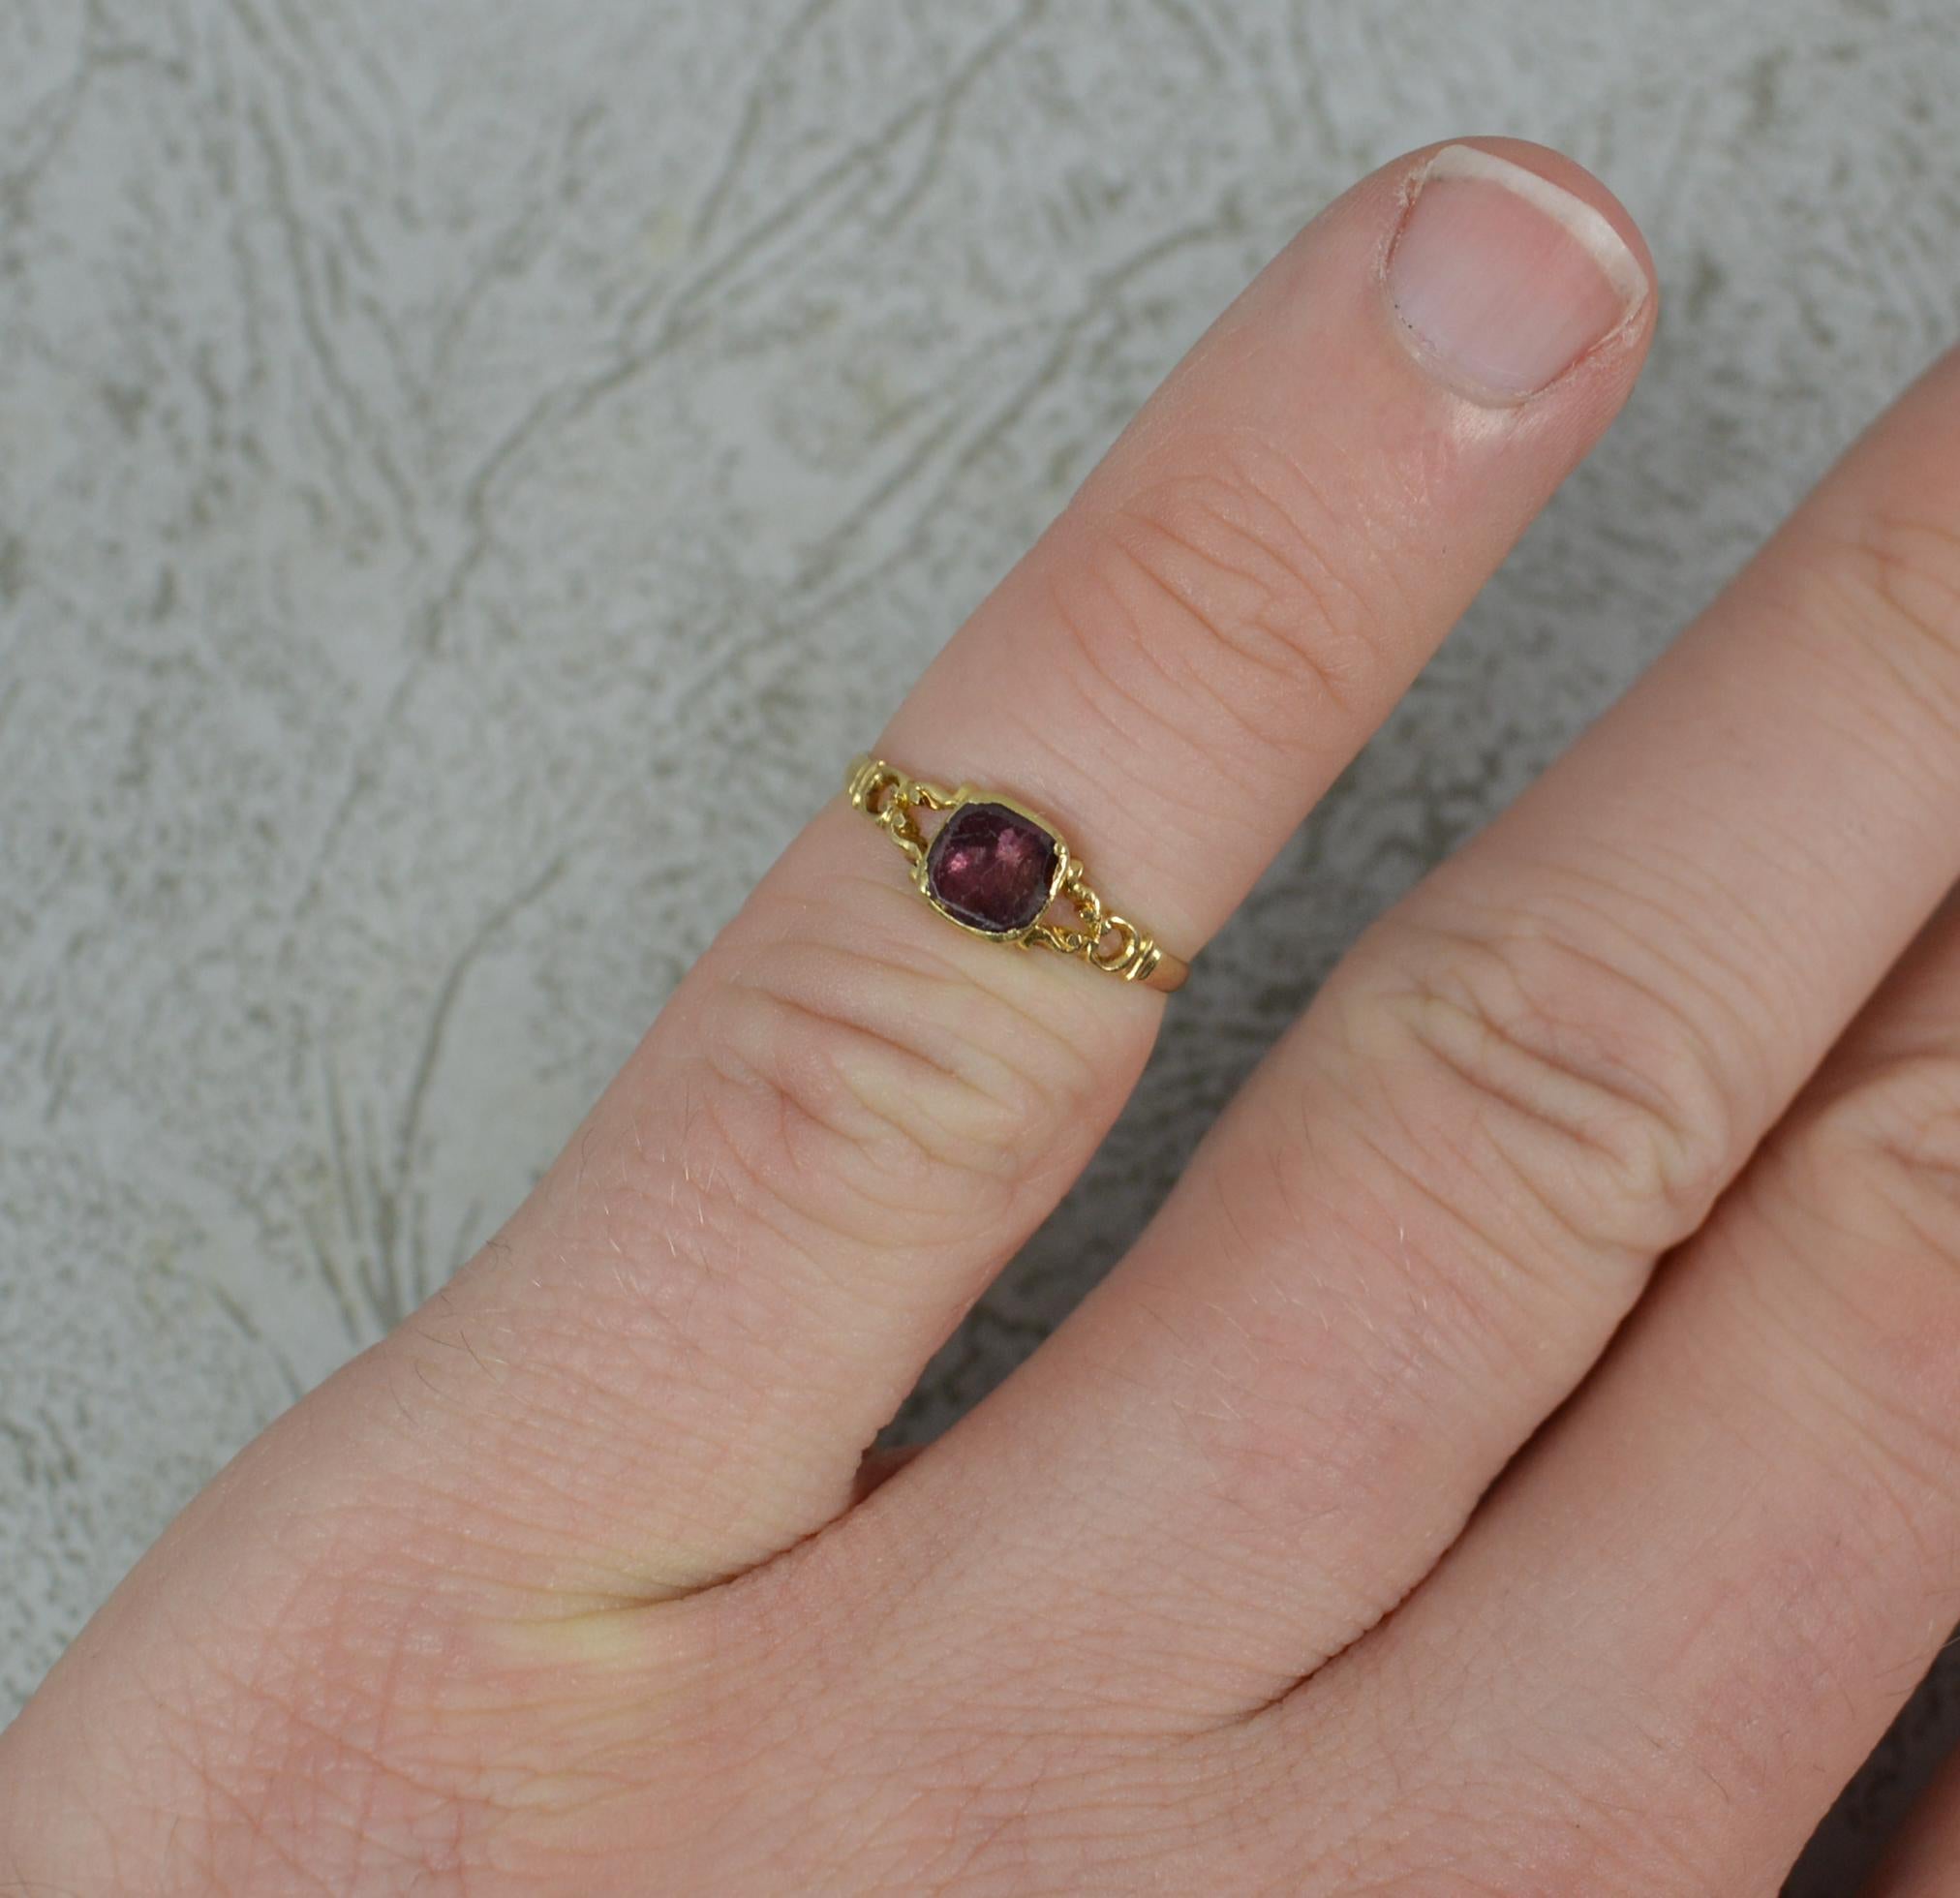 A superb Georgian period ring. Circa 1790.
Solid 18 carat yellow gold example.
Designed with one single flat cushion shaped garnet. 4.5mm x 4.5mm approx. With a pierced head to the sides.
Closed, foiled back, bezel setting.
A very small finger size,